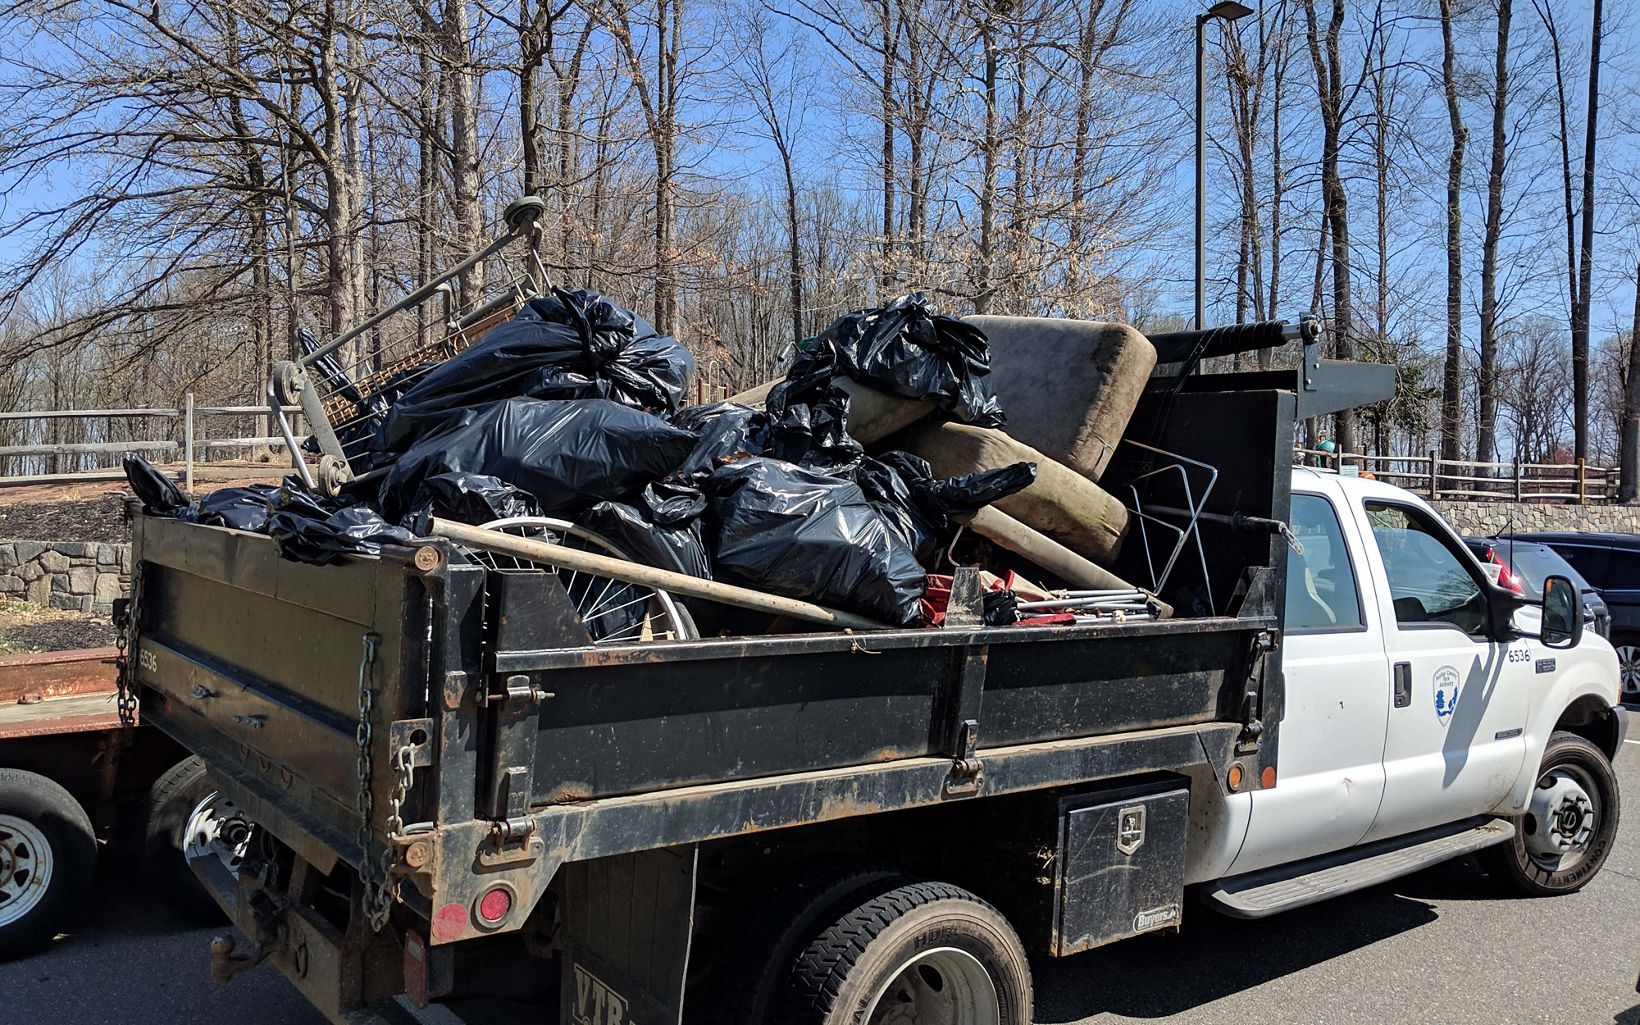 A large municipal truck parked in a parking lot is piled high with full black trash bags and large debris.